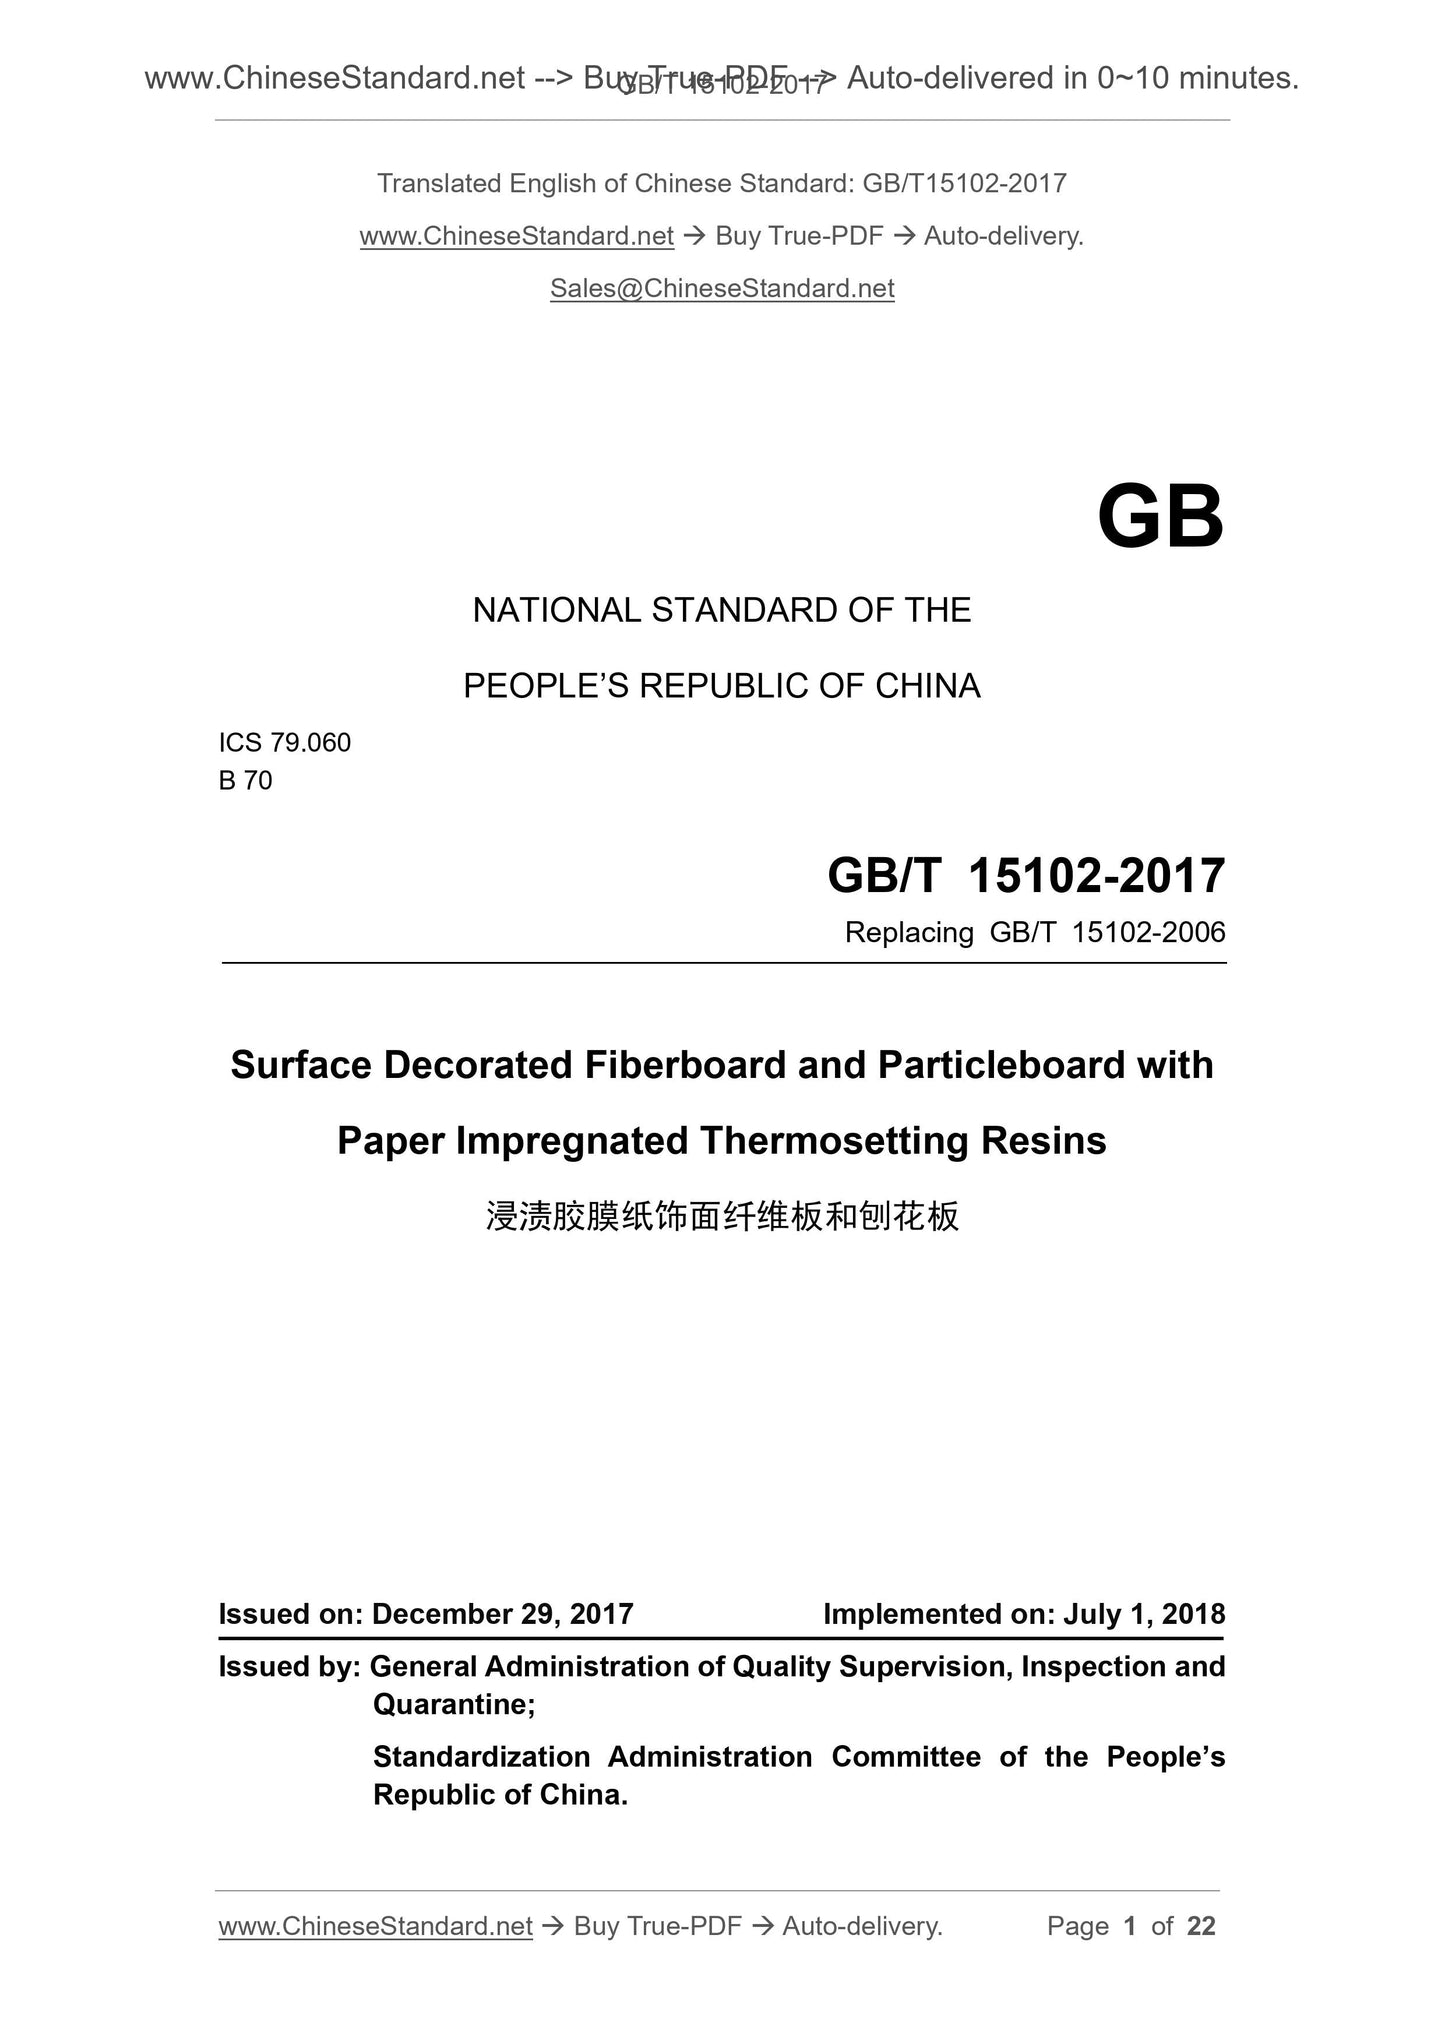 GB/T 15102-2017 Page 1